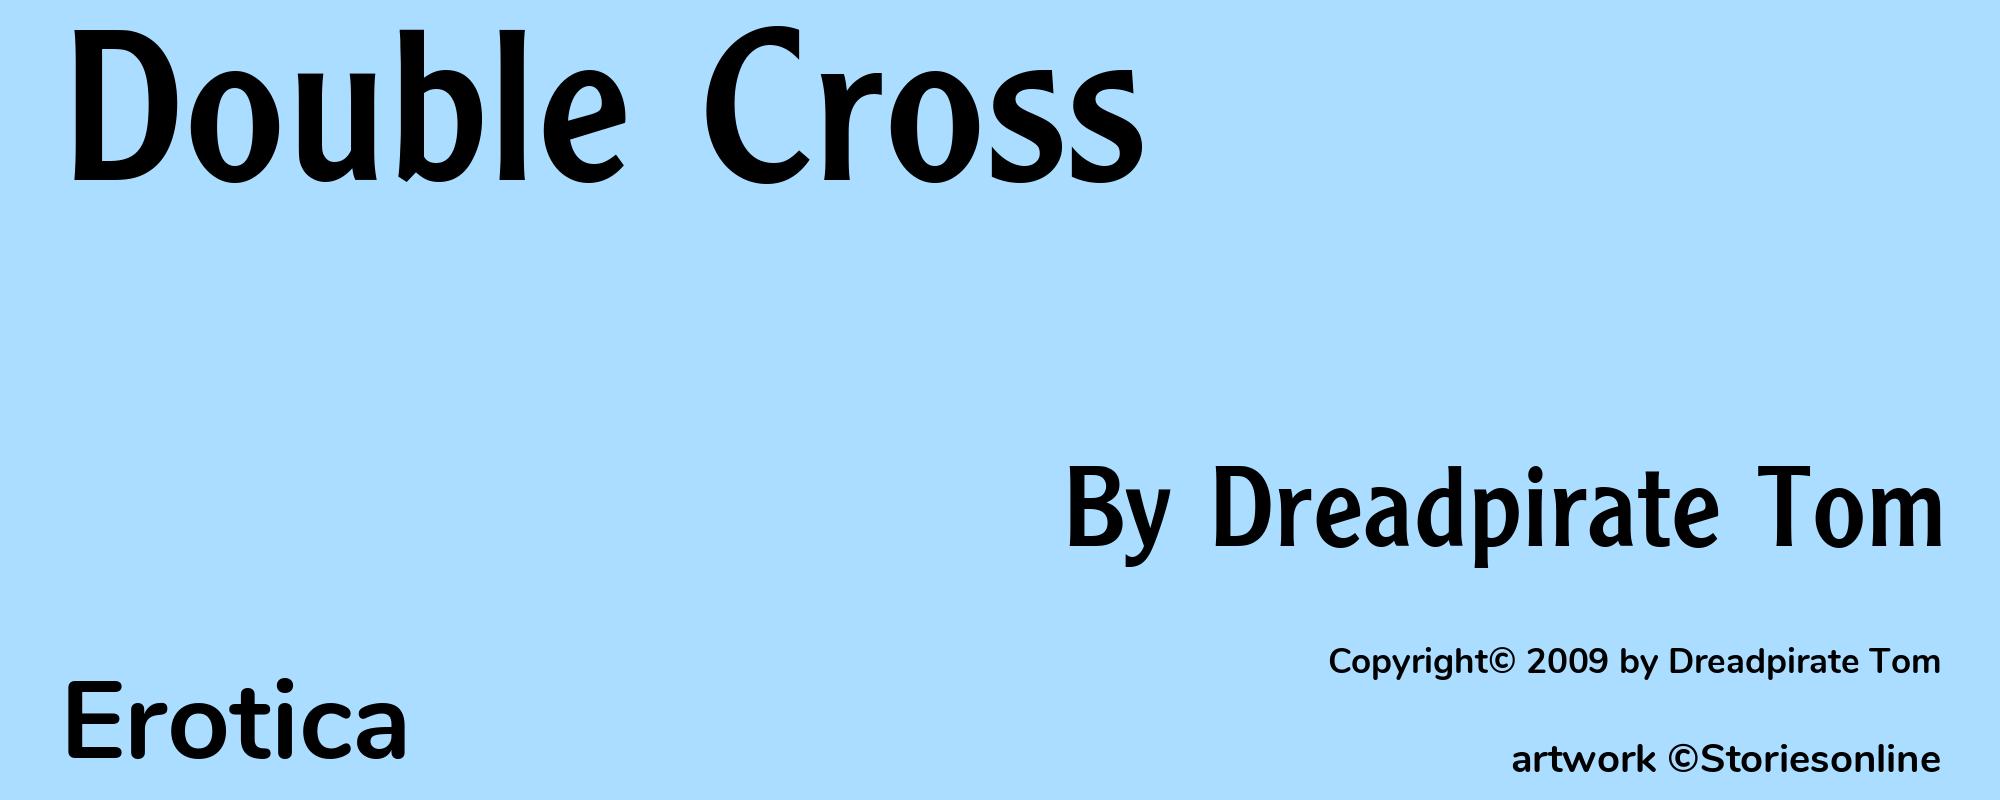 Double Cross - Cover